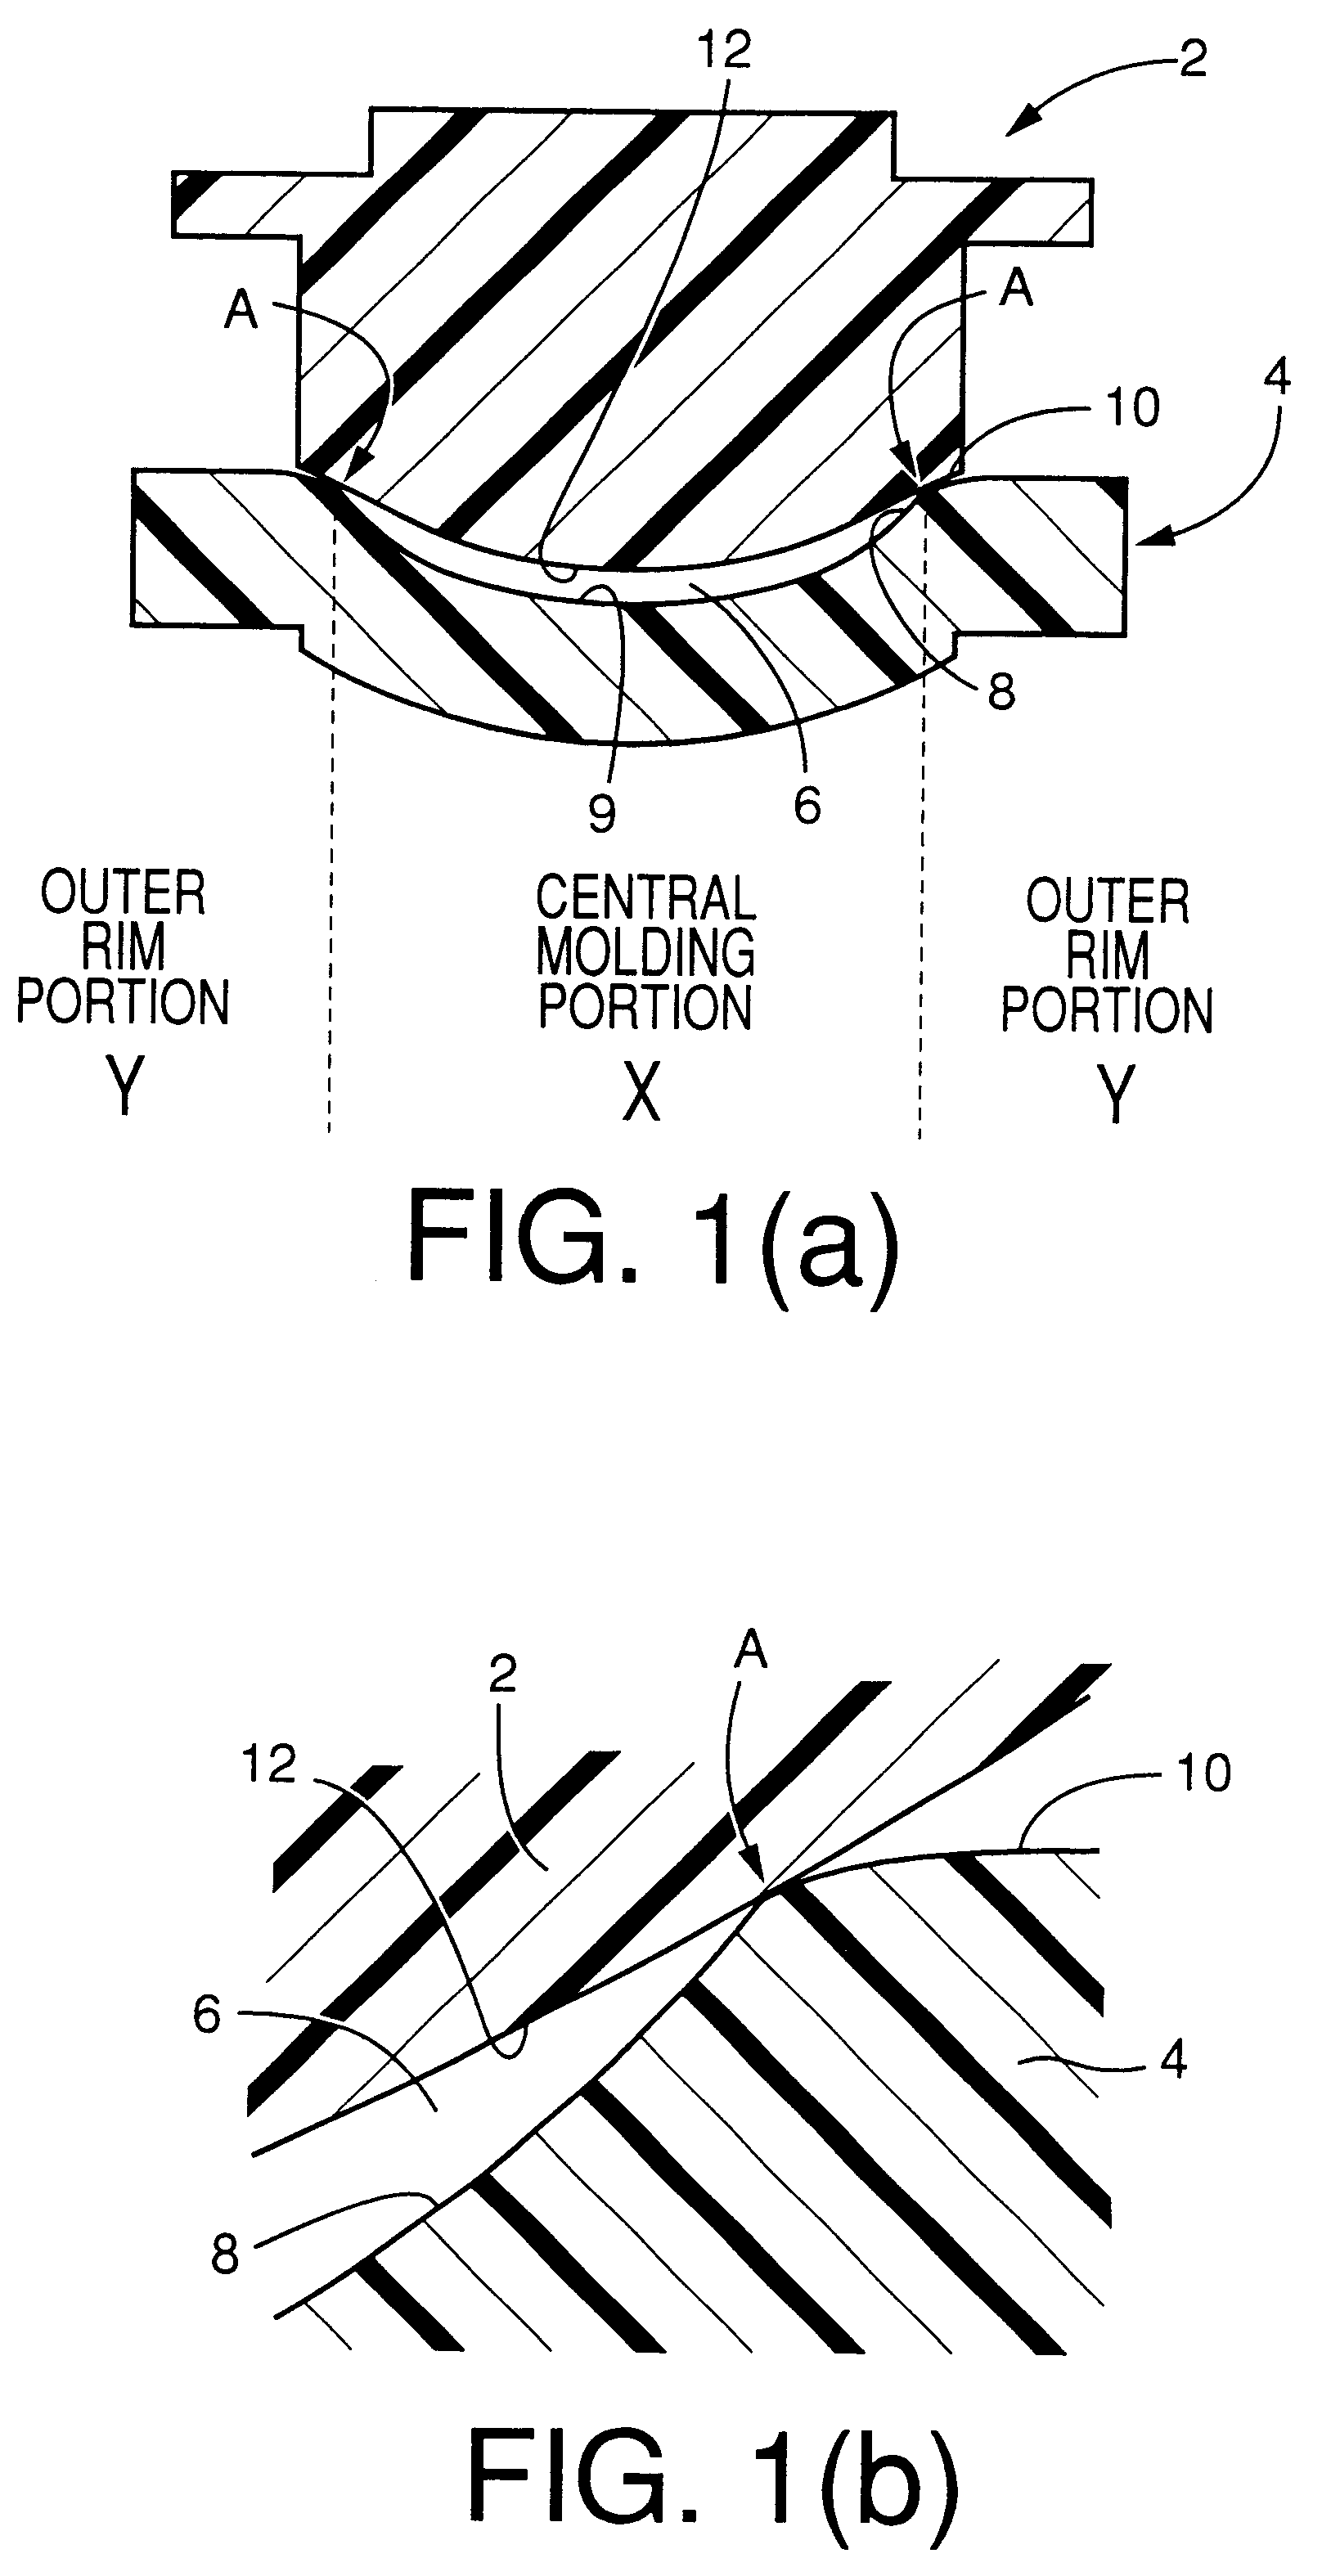 Mold assembly for forming ophthalmic lens